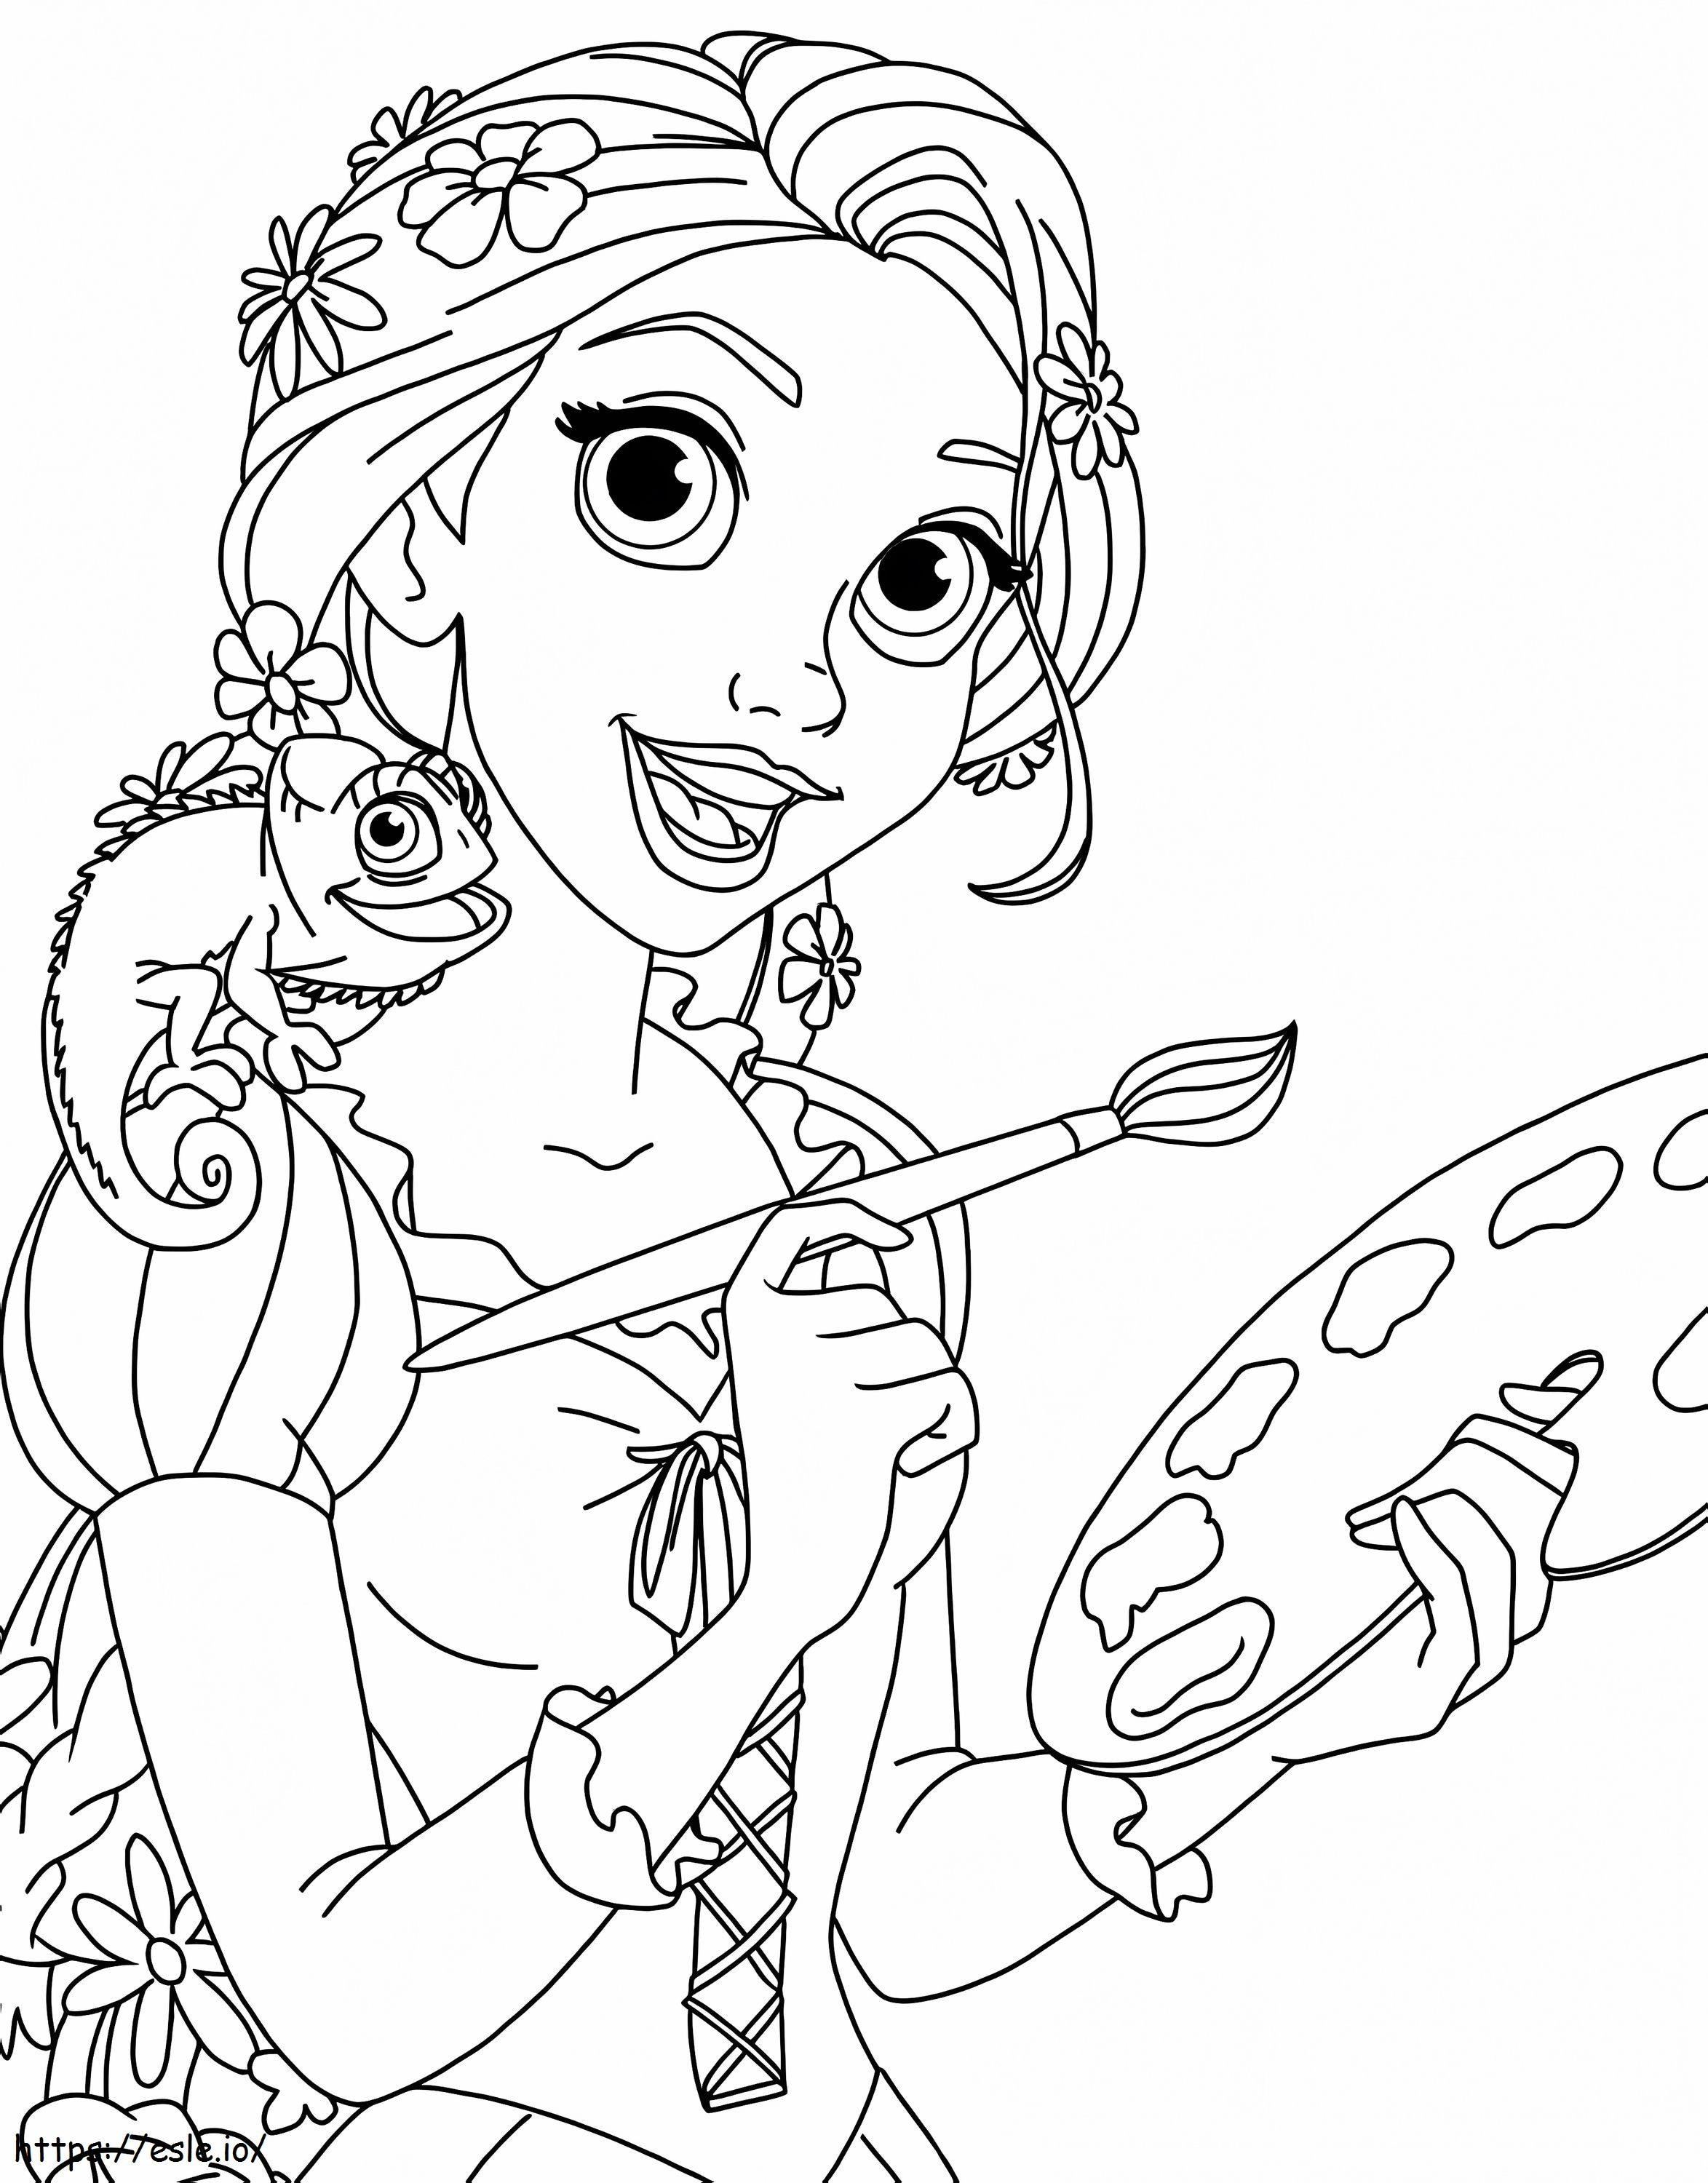 Rapunzel Painting With The Gecko coloring page